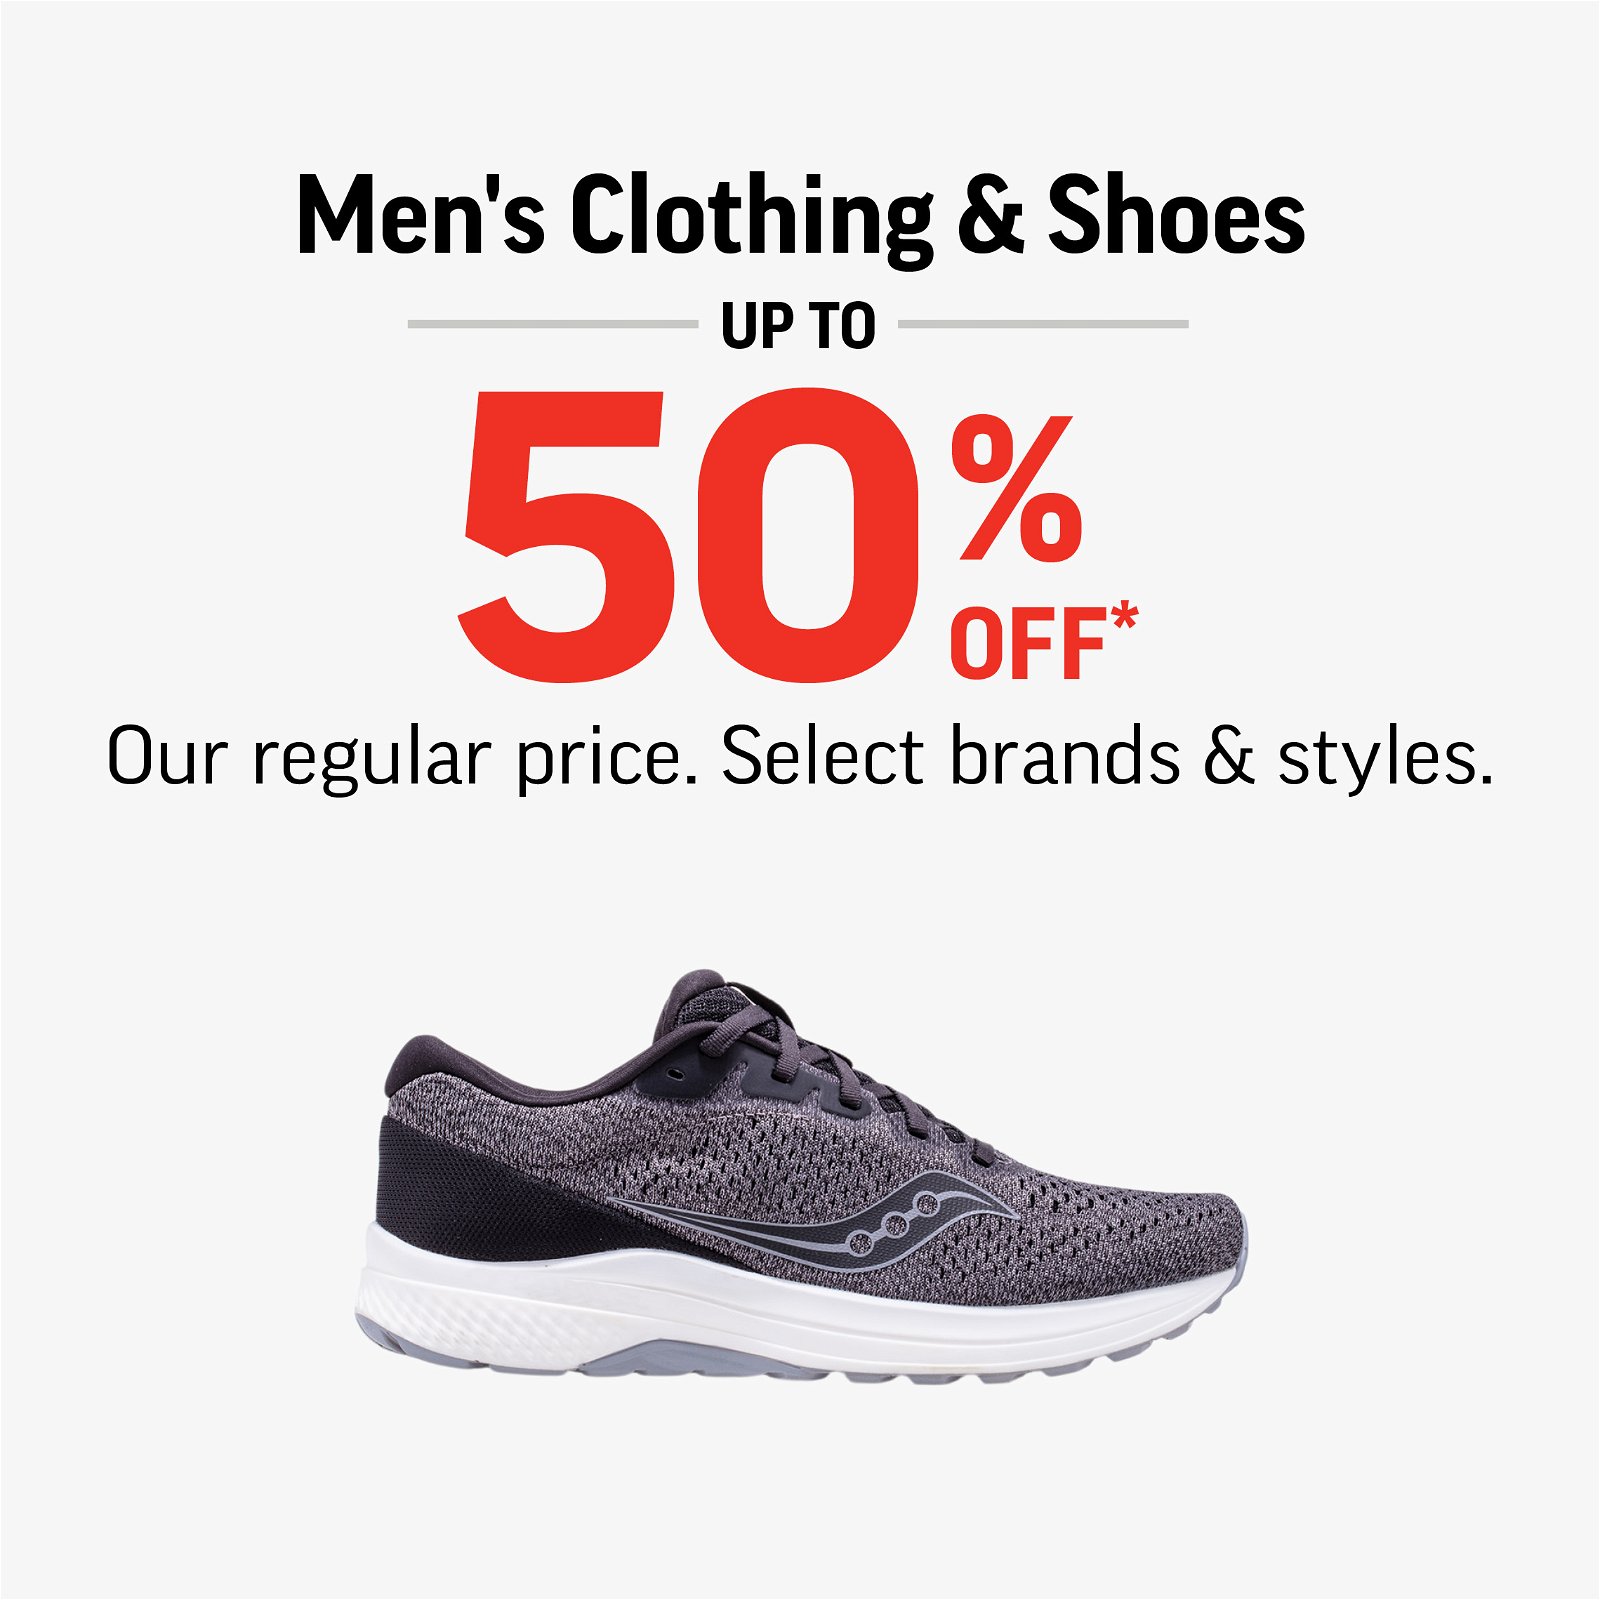 MEN'S CLOTHING & SHOES UP TO 50% OFF